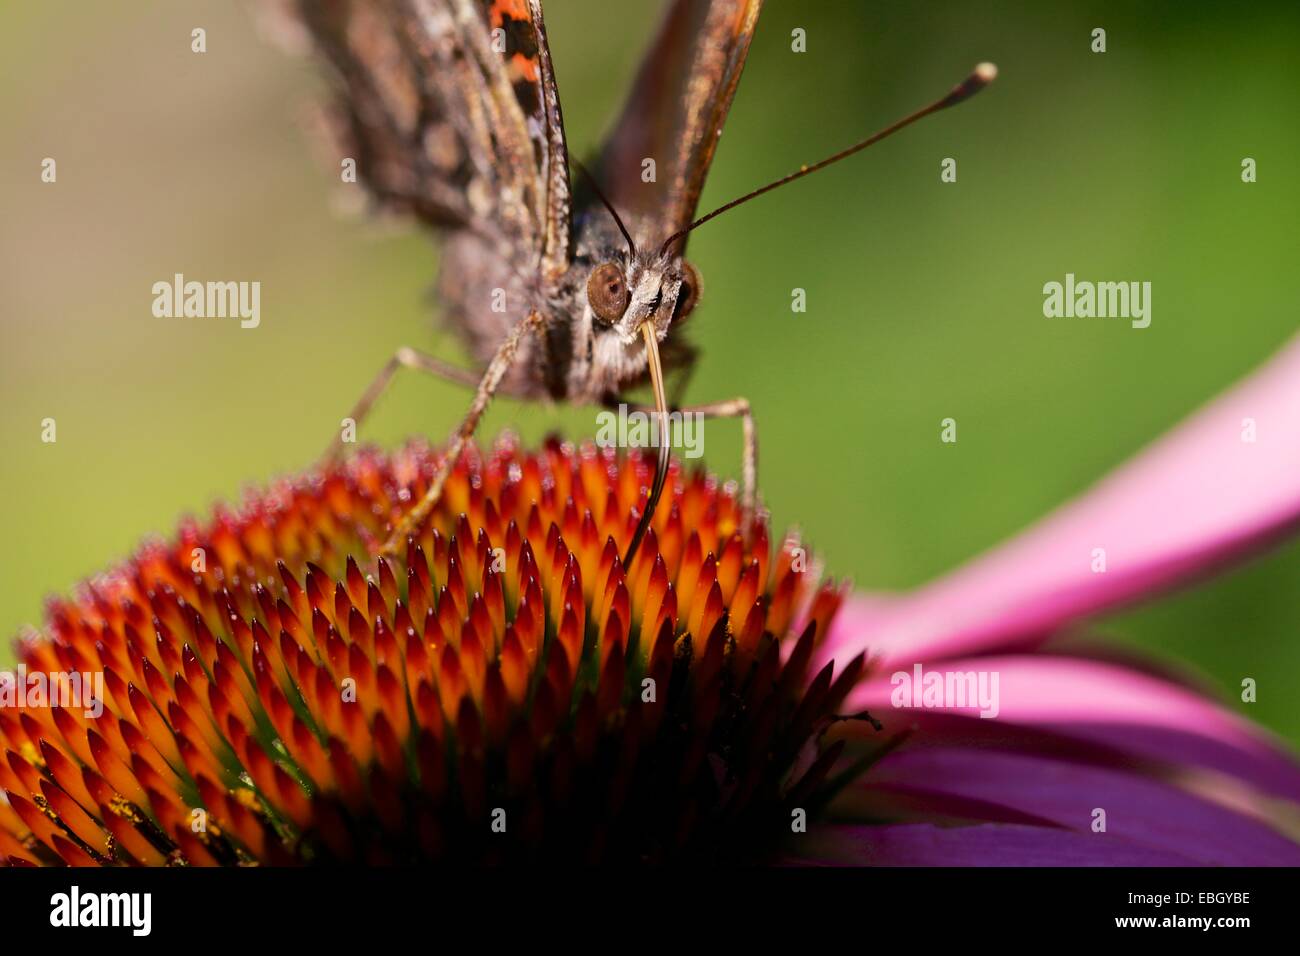 Red admiral butterfly on purple coneflower, up close and personal. Stock Photo